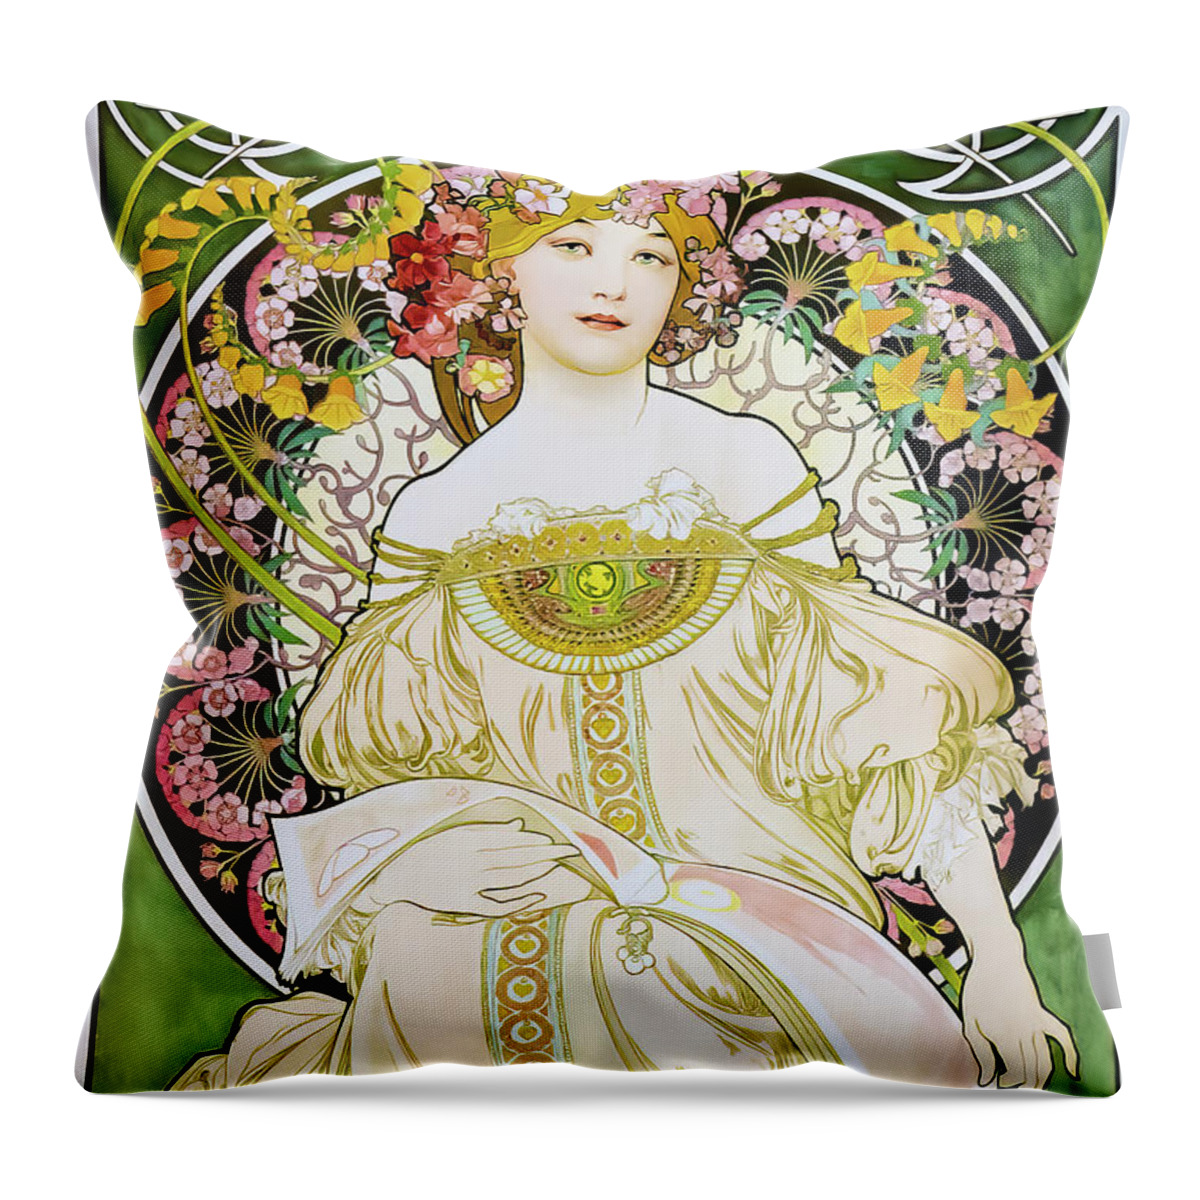 Alphonse Throw Pillow featuring the drawing F Champenois Paris Poster 1898 by Alphonse Mucha by M G Whittingham